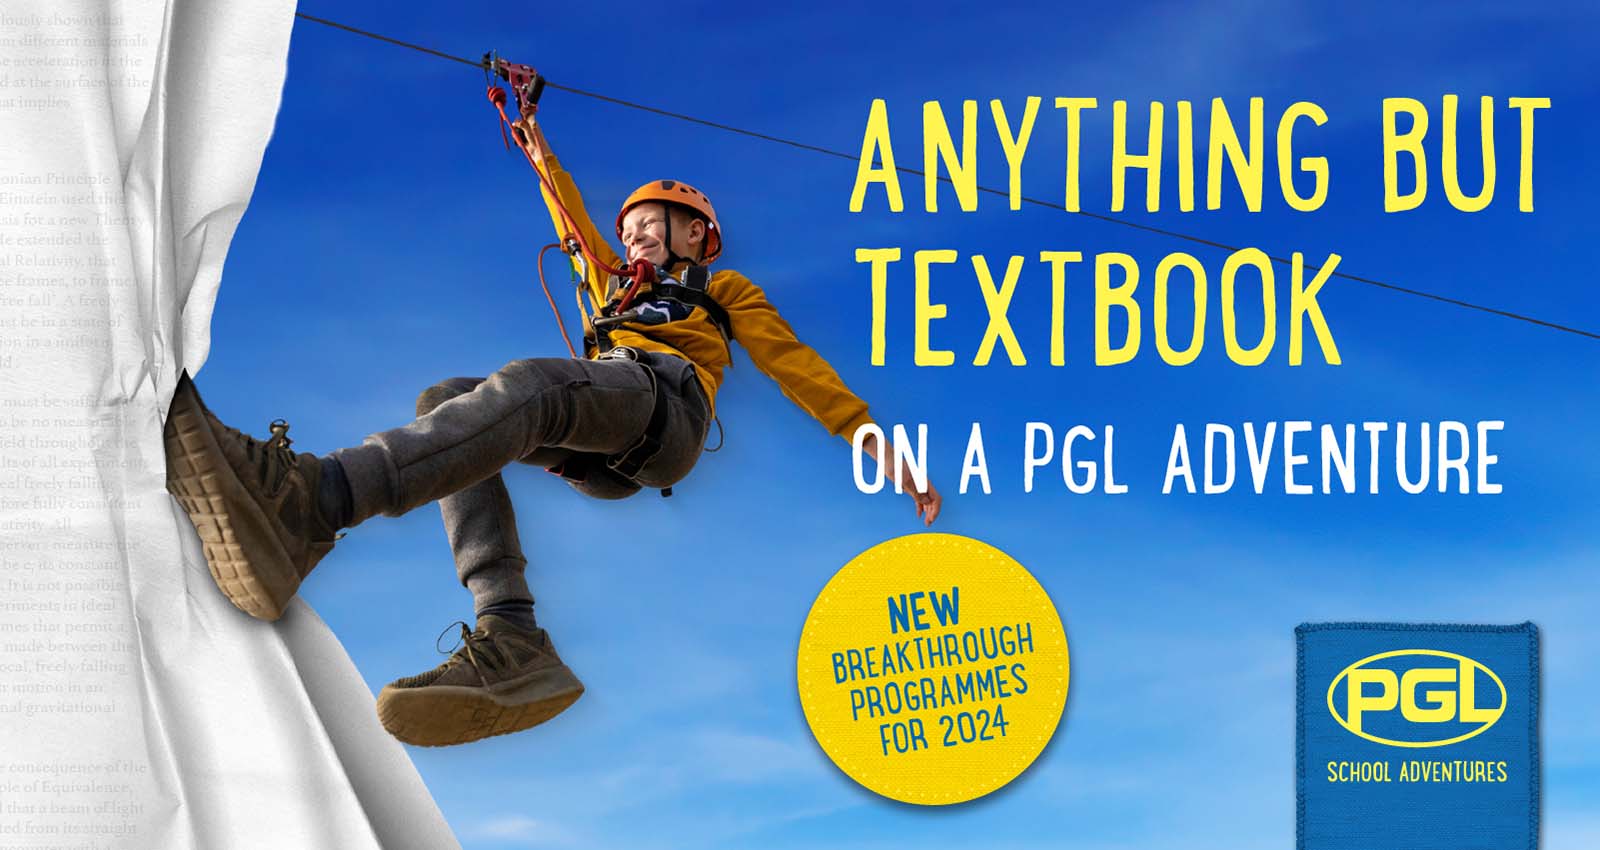 Anything but textbook on a PGL School Adventure